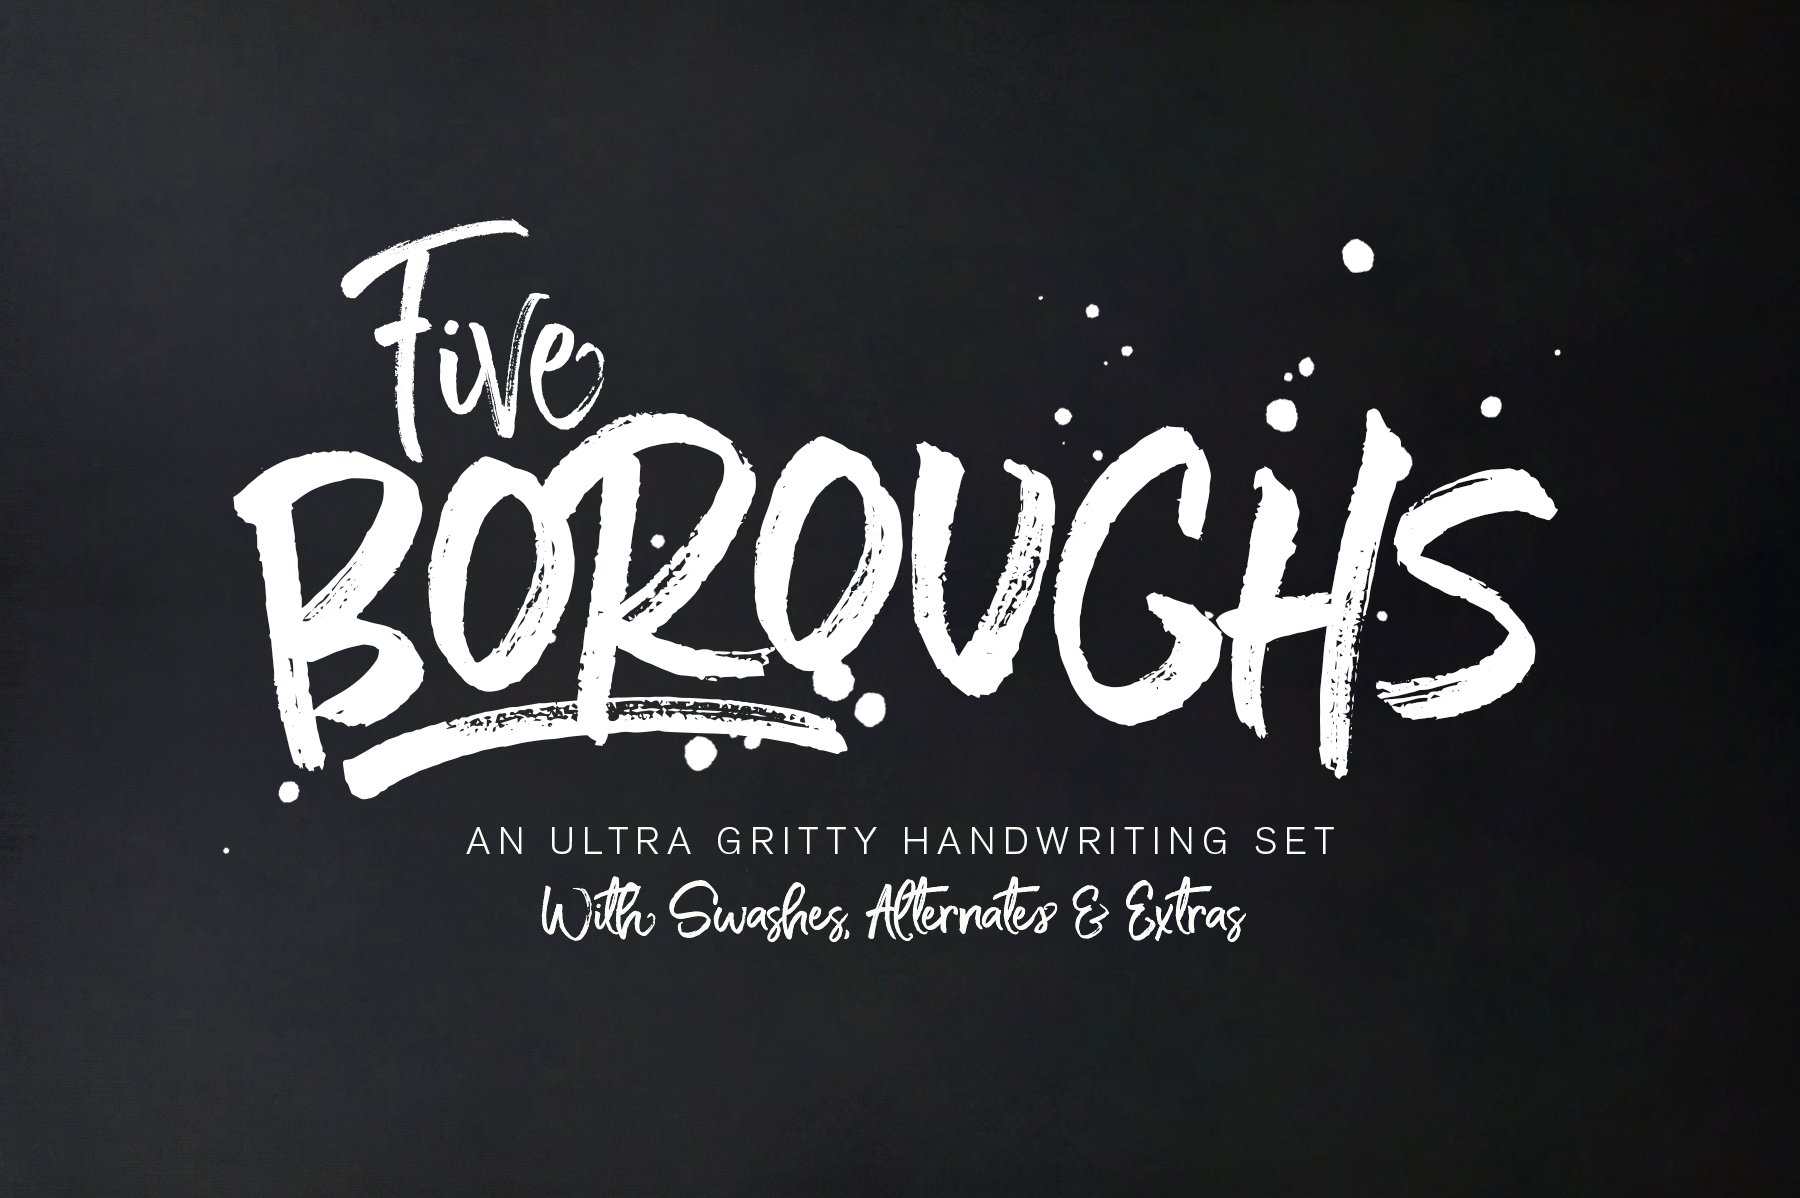 Five Boroughs Font Family cover image.